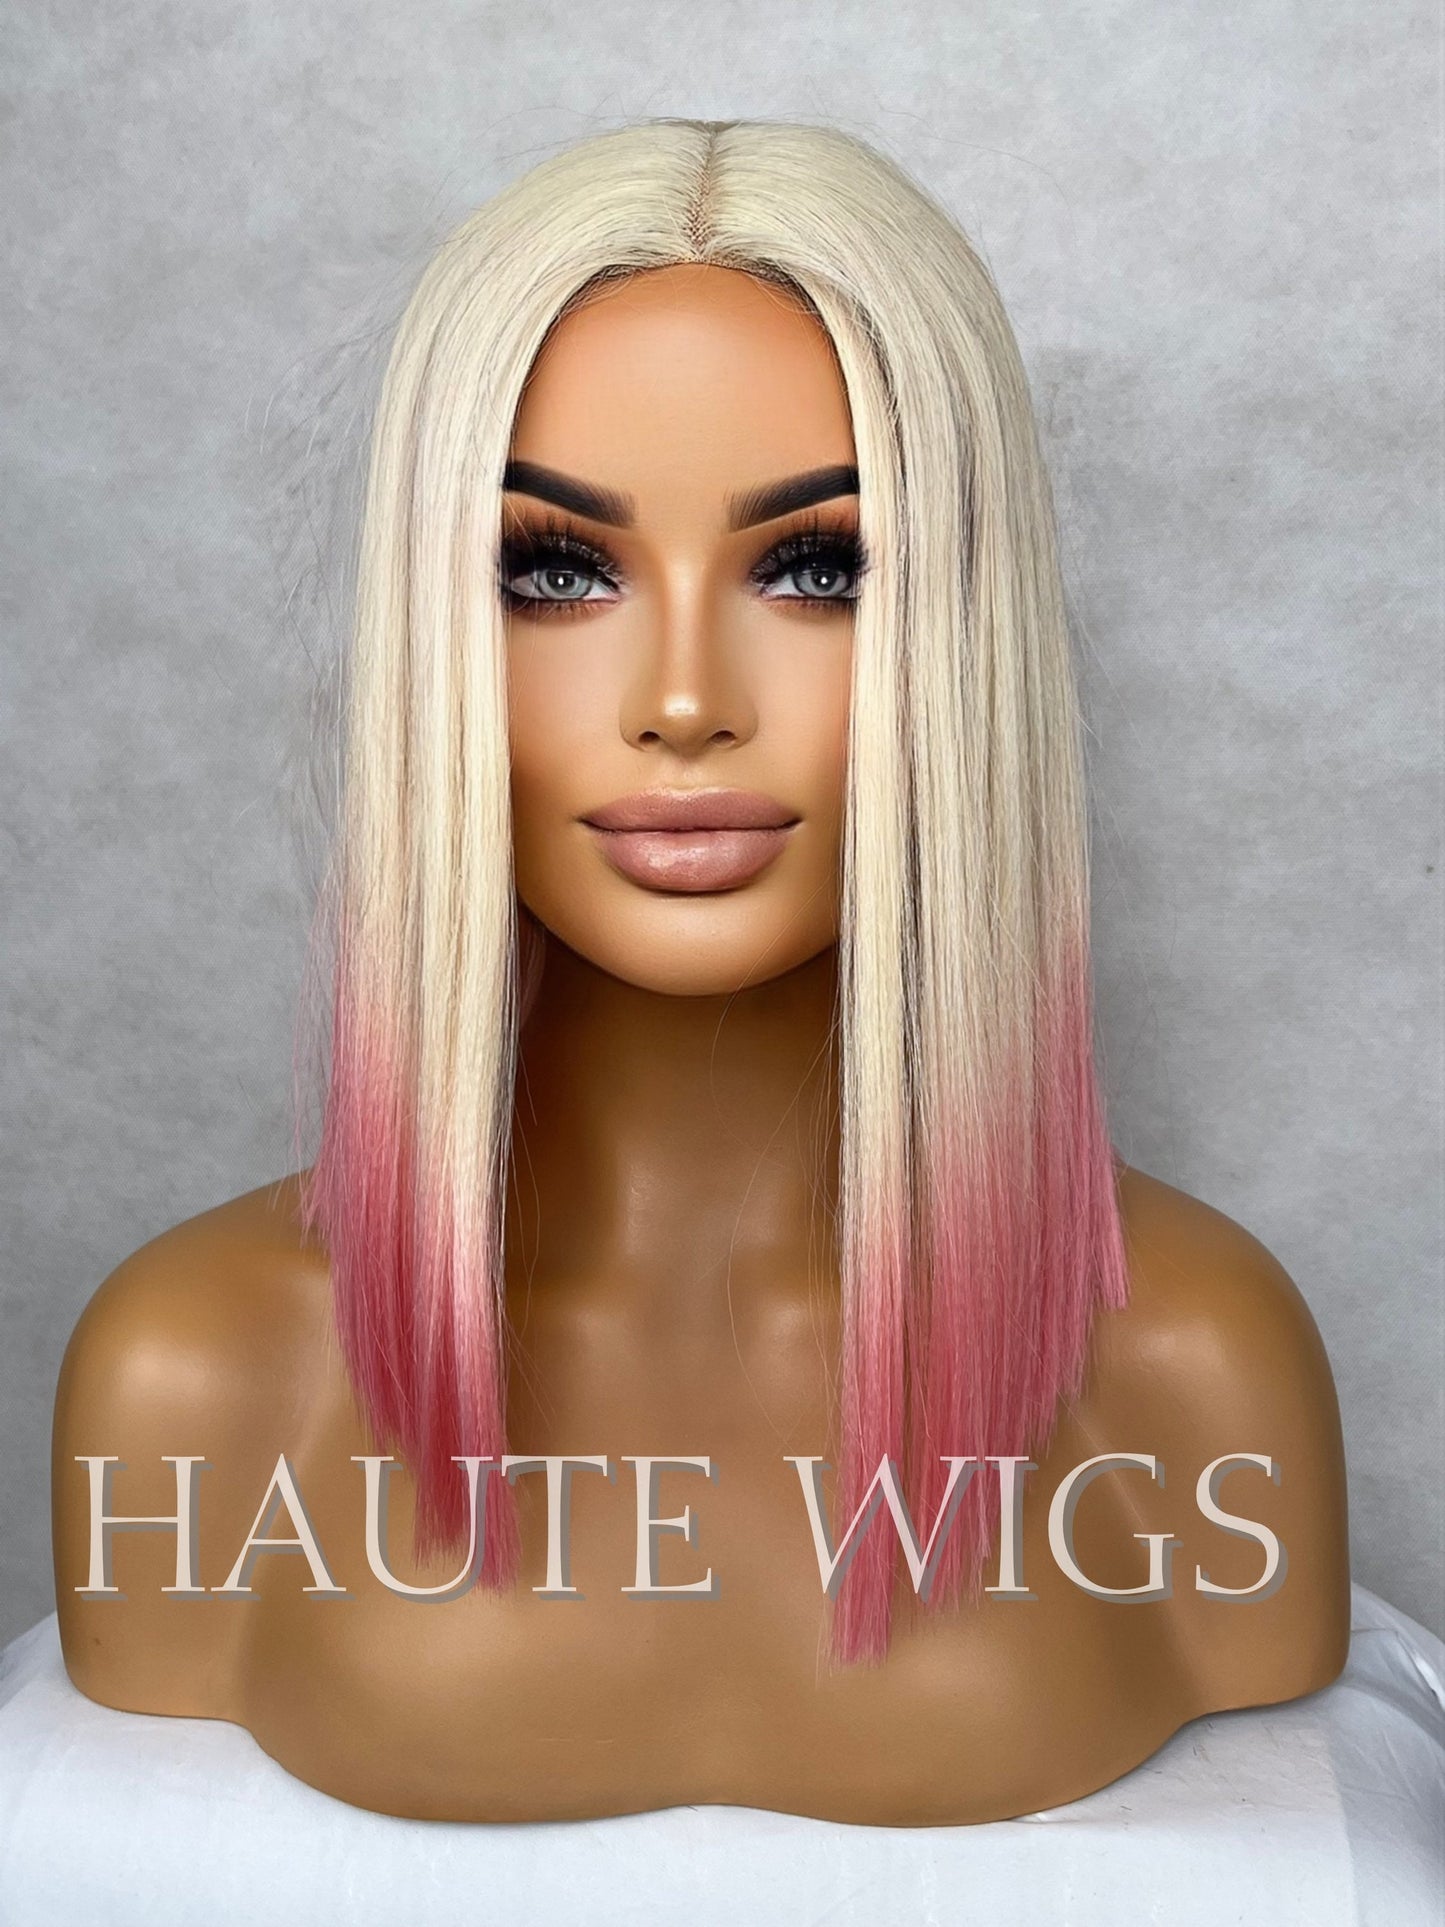 Ombré 613 Creamy Blonde Neon Pink Ends Dip Dye Wig Center Part Short Straight NO Lace Front Human Hair Blends Wig Ladies Gift for her